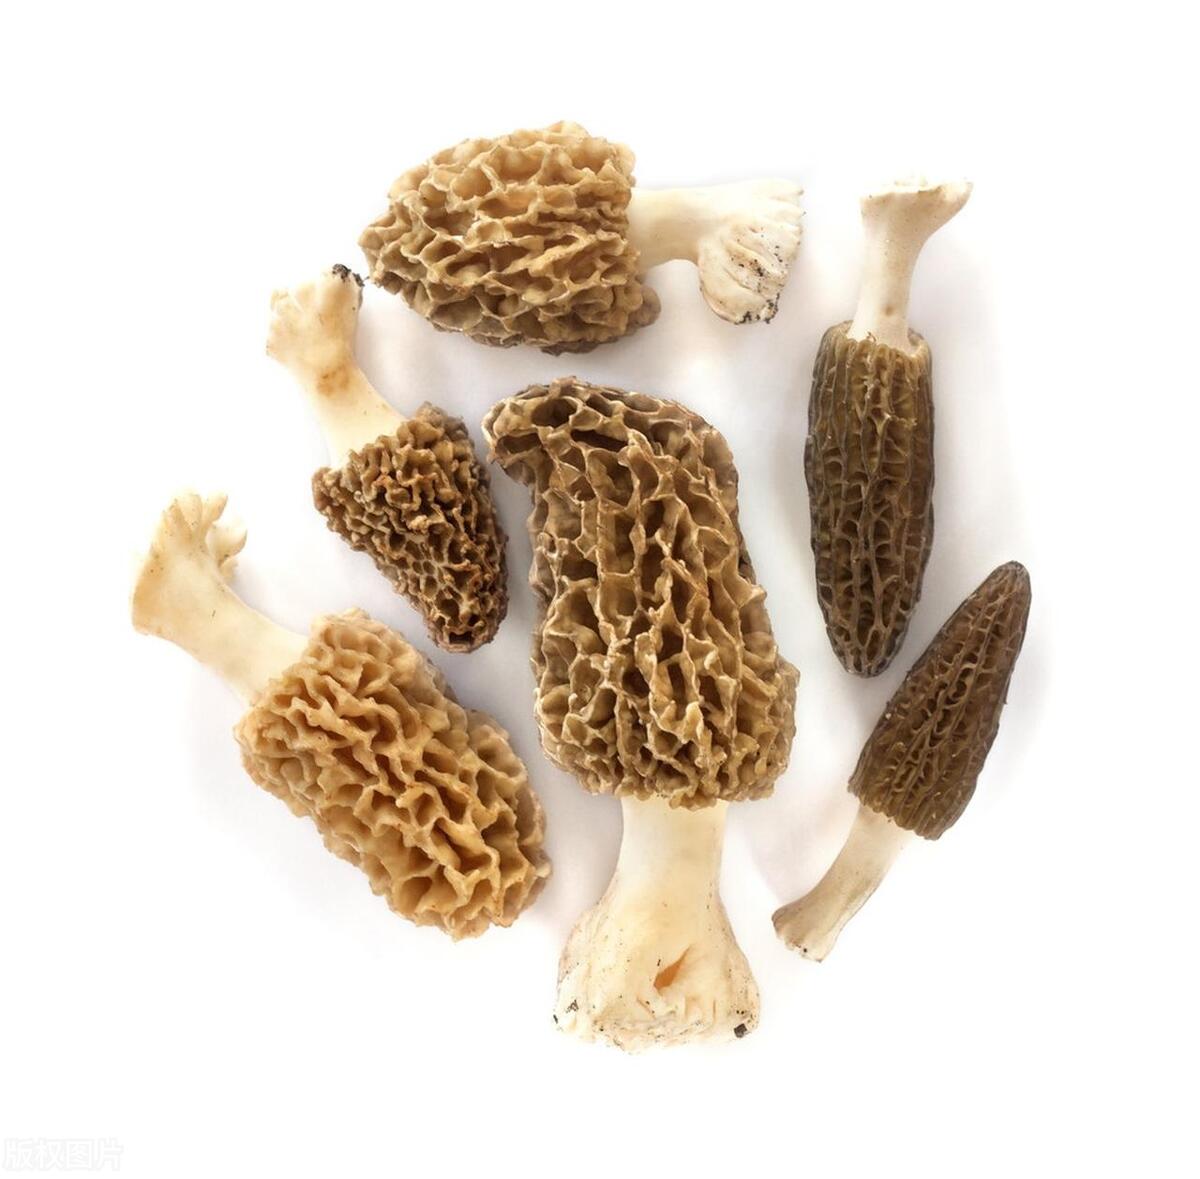 Article Title: Morel Mushrooms: A Health Nut's Secret Weapon for Well-being